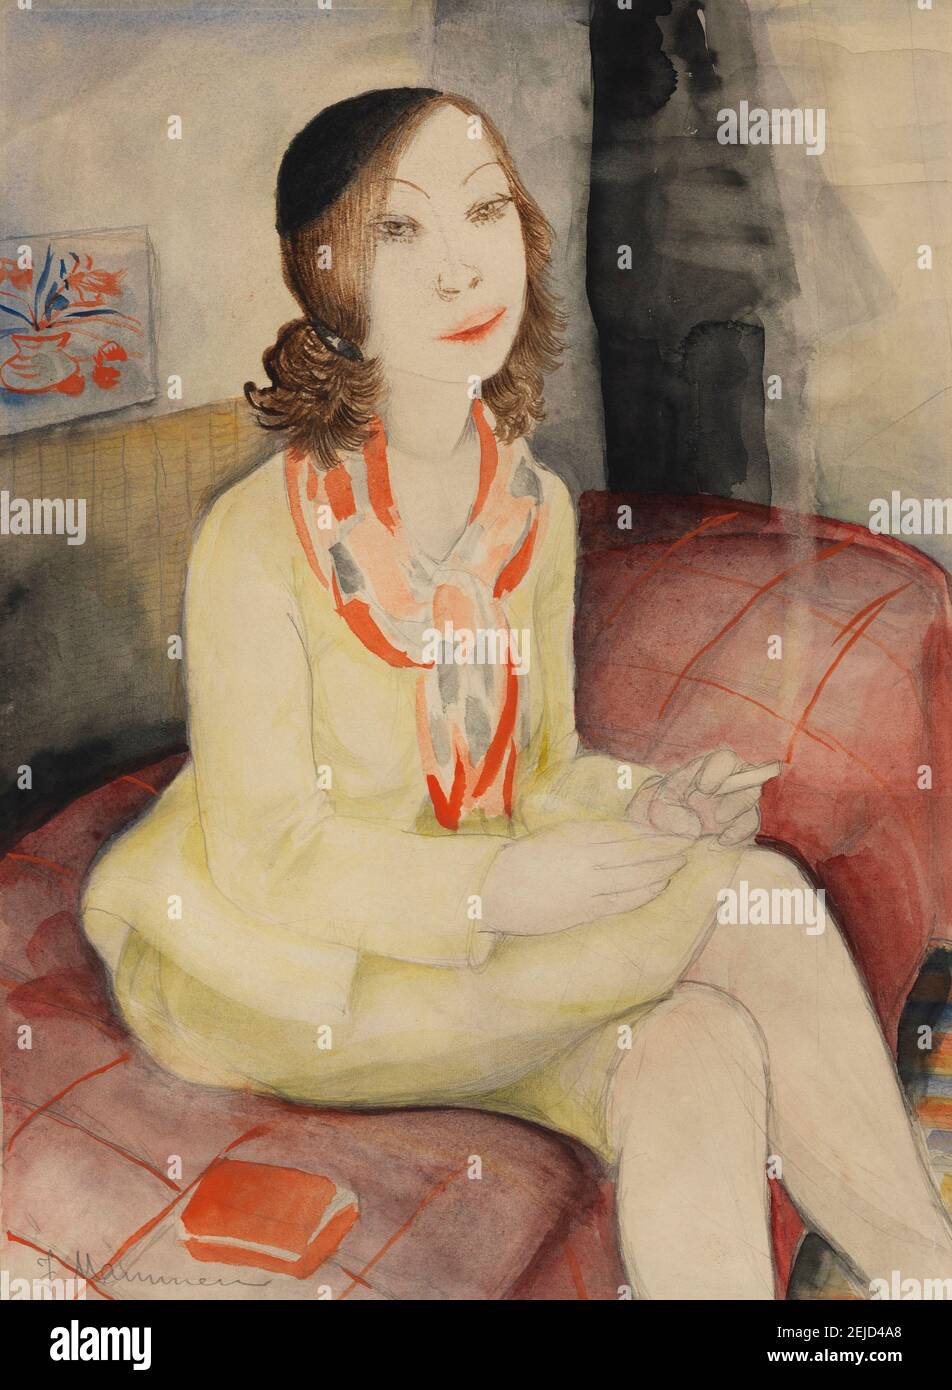 Meditation. Museum: PRIVATE COLLECTION. Author: JEANNE MAMMEN. Stock Photo